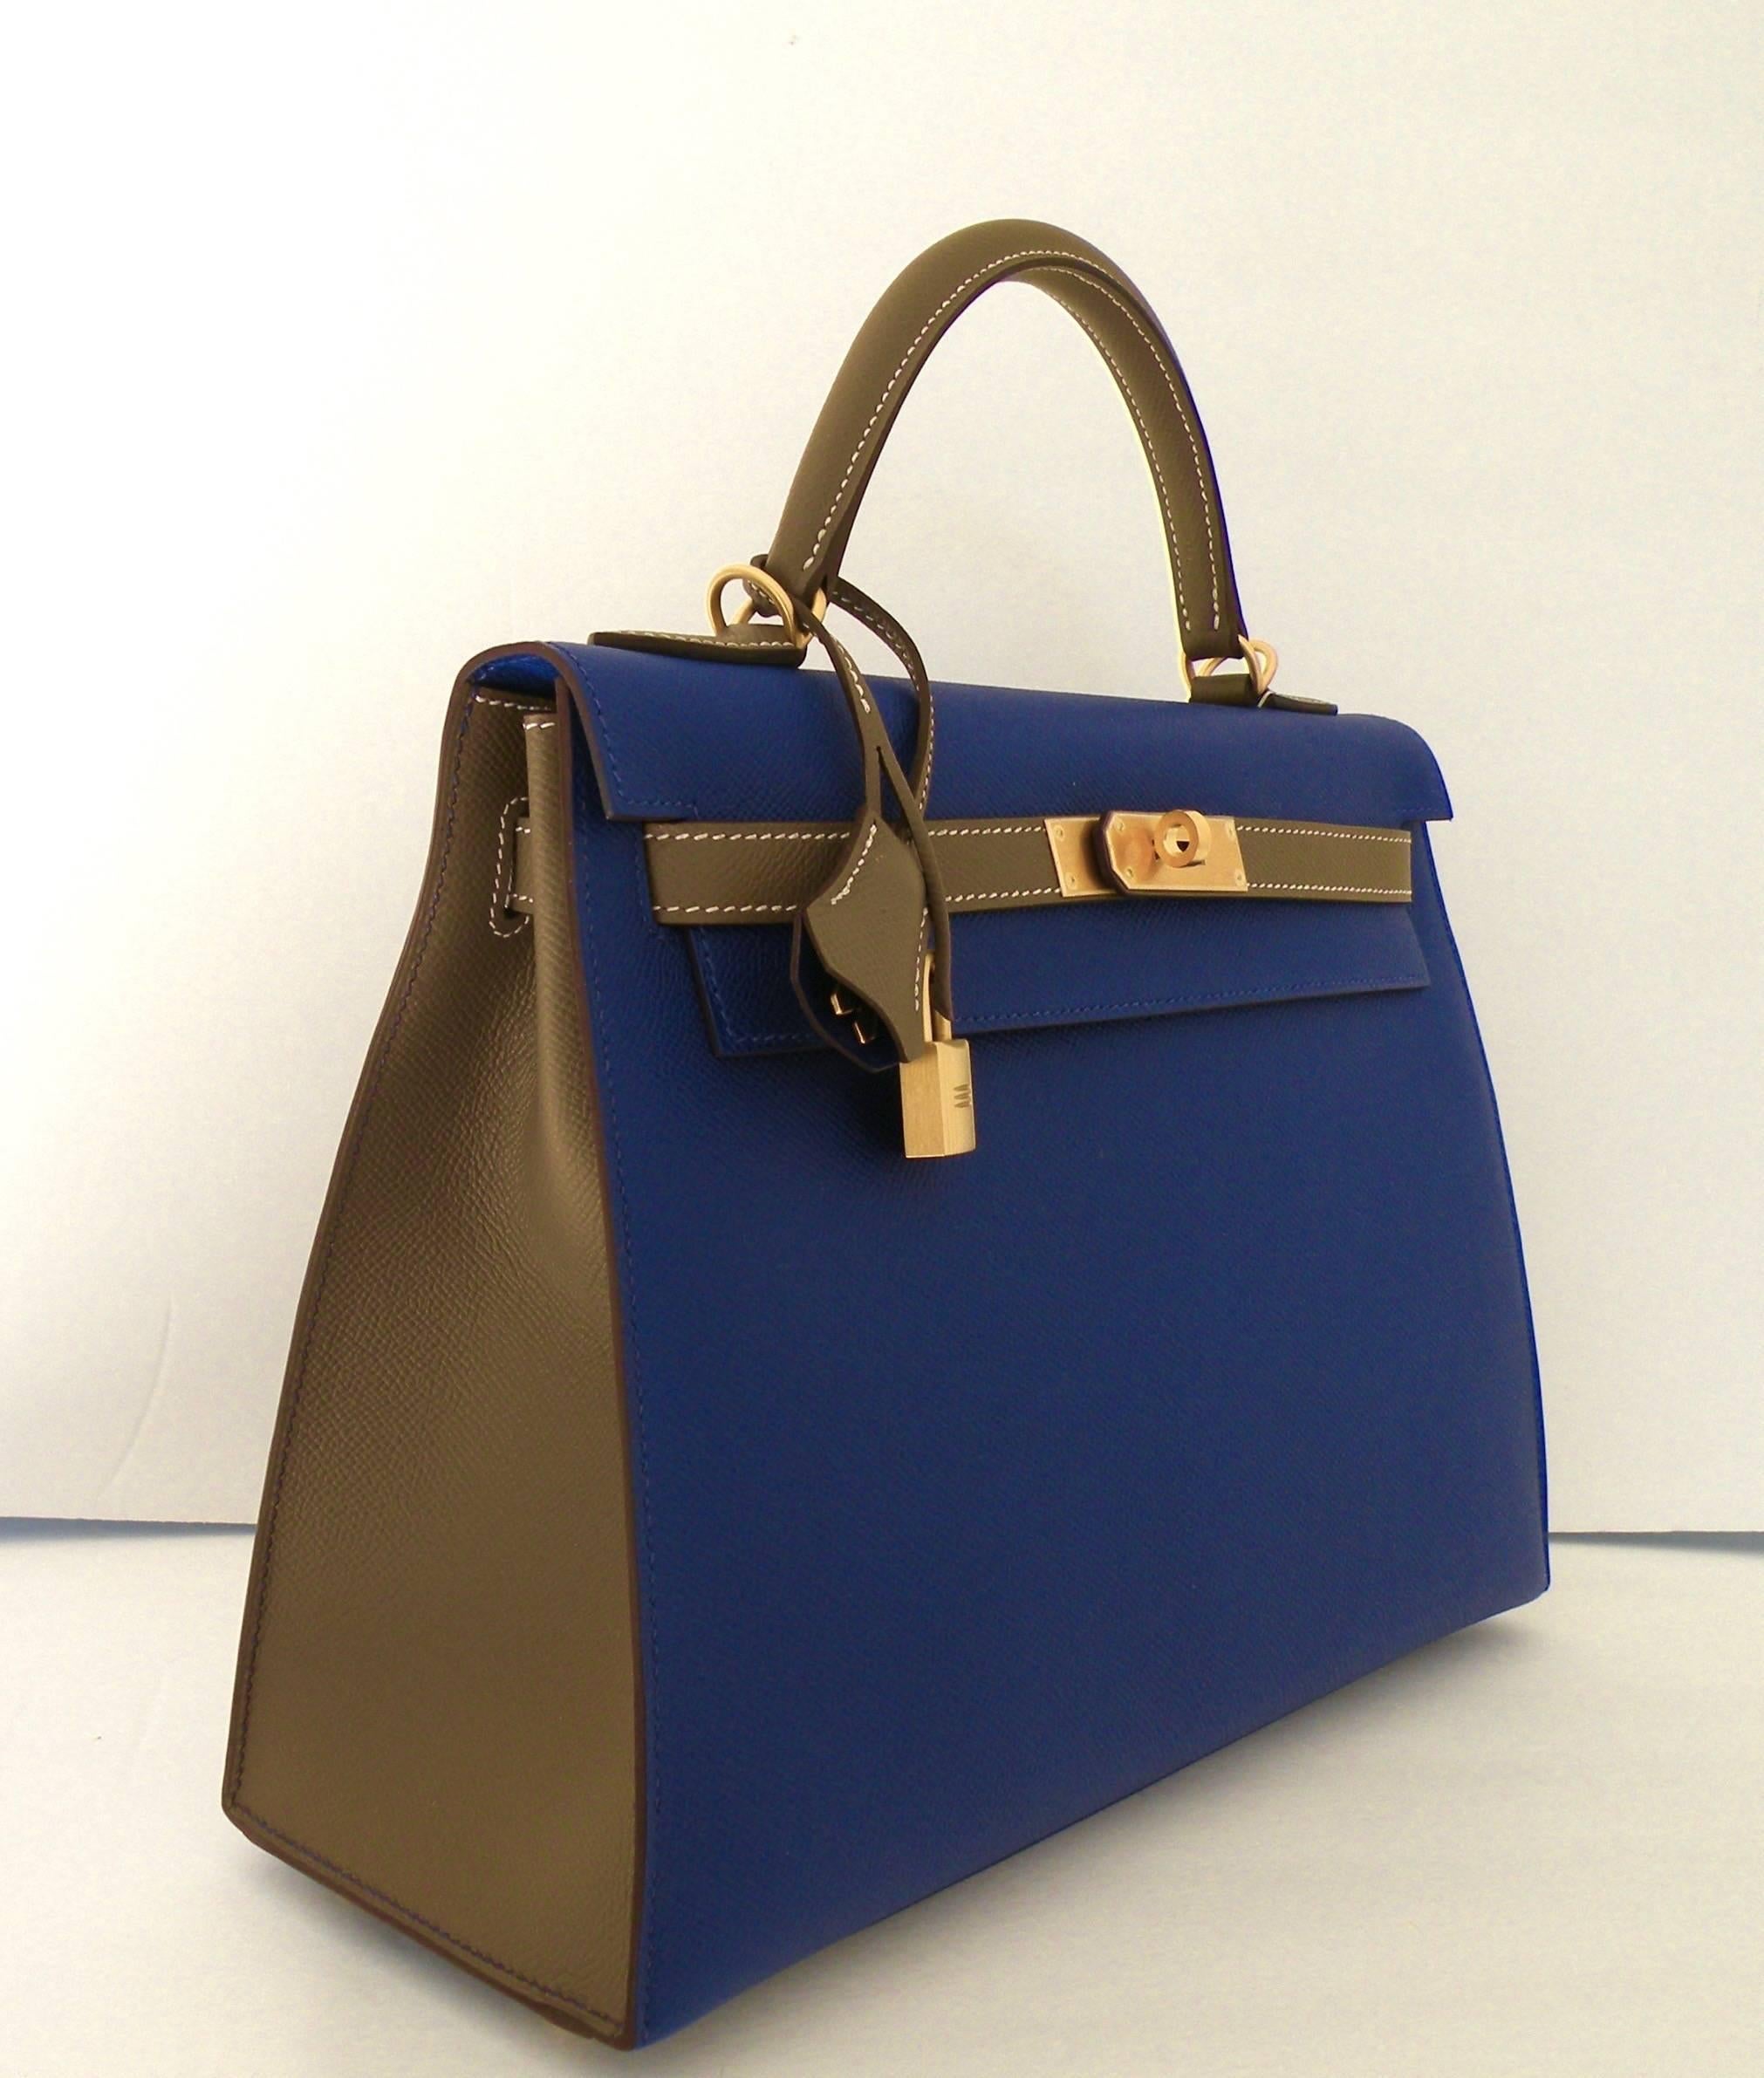 Hermes 32cm Kelly in Sellier Style
HSS
Specially ordered , marked with a Horseshoe stamp
Lovely Combination
Blue Electric and Etoupe
Epsom Leather
Brushed Gold Hardware
Blue Electric on Front , Back, Bottom and Inside
Etoupe on Handle,  Straps and